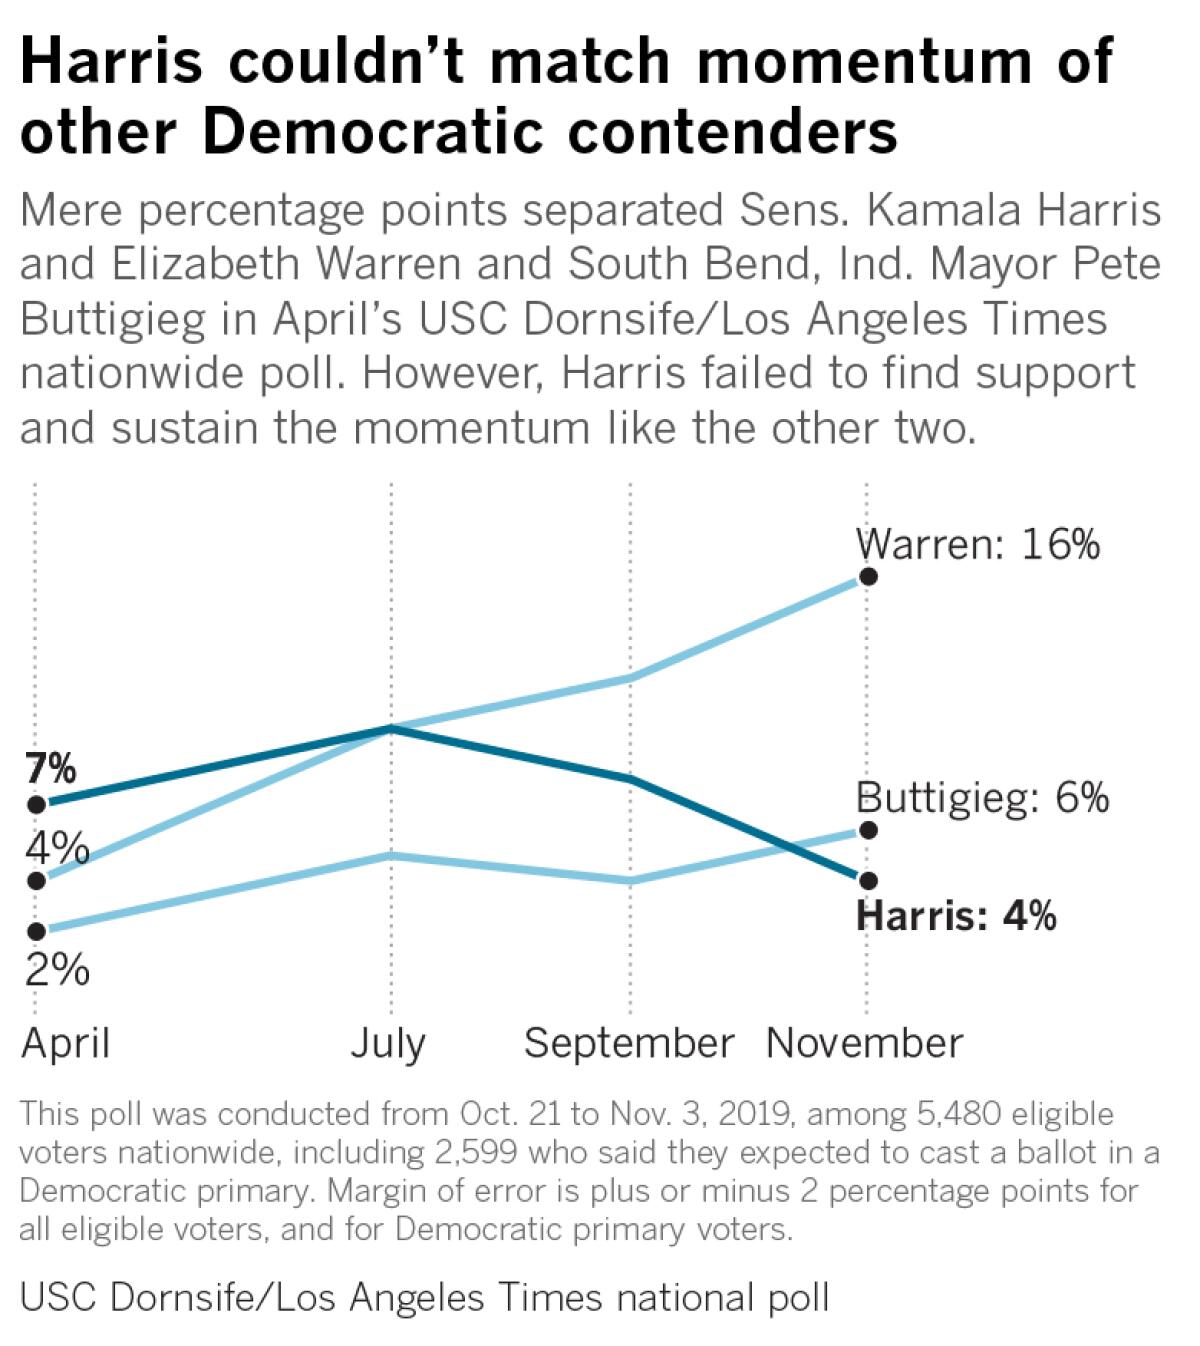 Mere percentage points separated Sens. Kamala Harris and Elizabeth Warren and South Bend, Ind. Mayor Pete Buttigieg in April’s USC Dornsife/Los Angeles Times nationwide poll. However, Harris failed to find support and sustain the momentum like the other two.